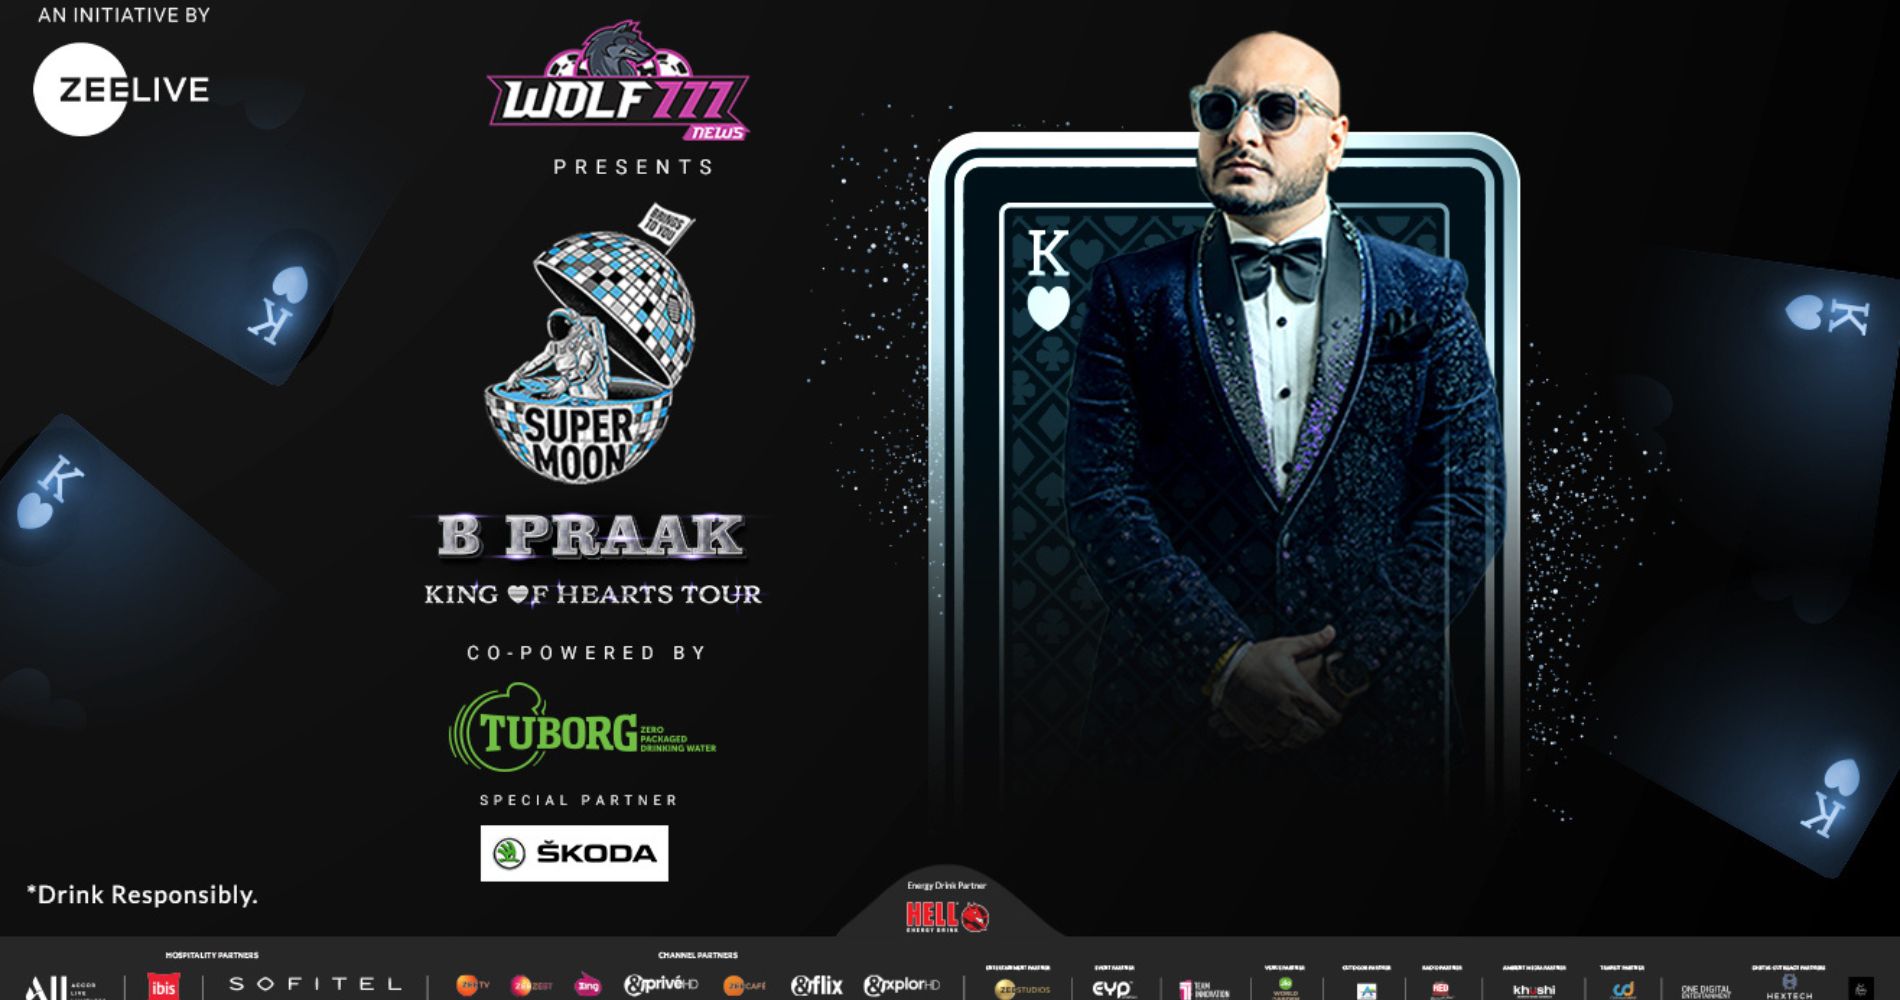 Supermoon brings B Praak – The King of Hearts Tour to multiple cities in India this June!